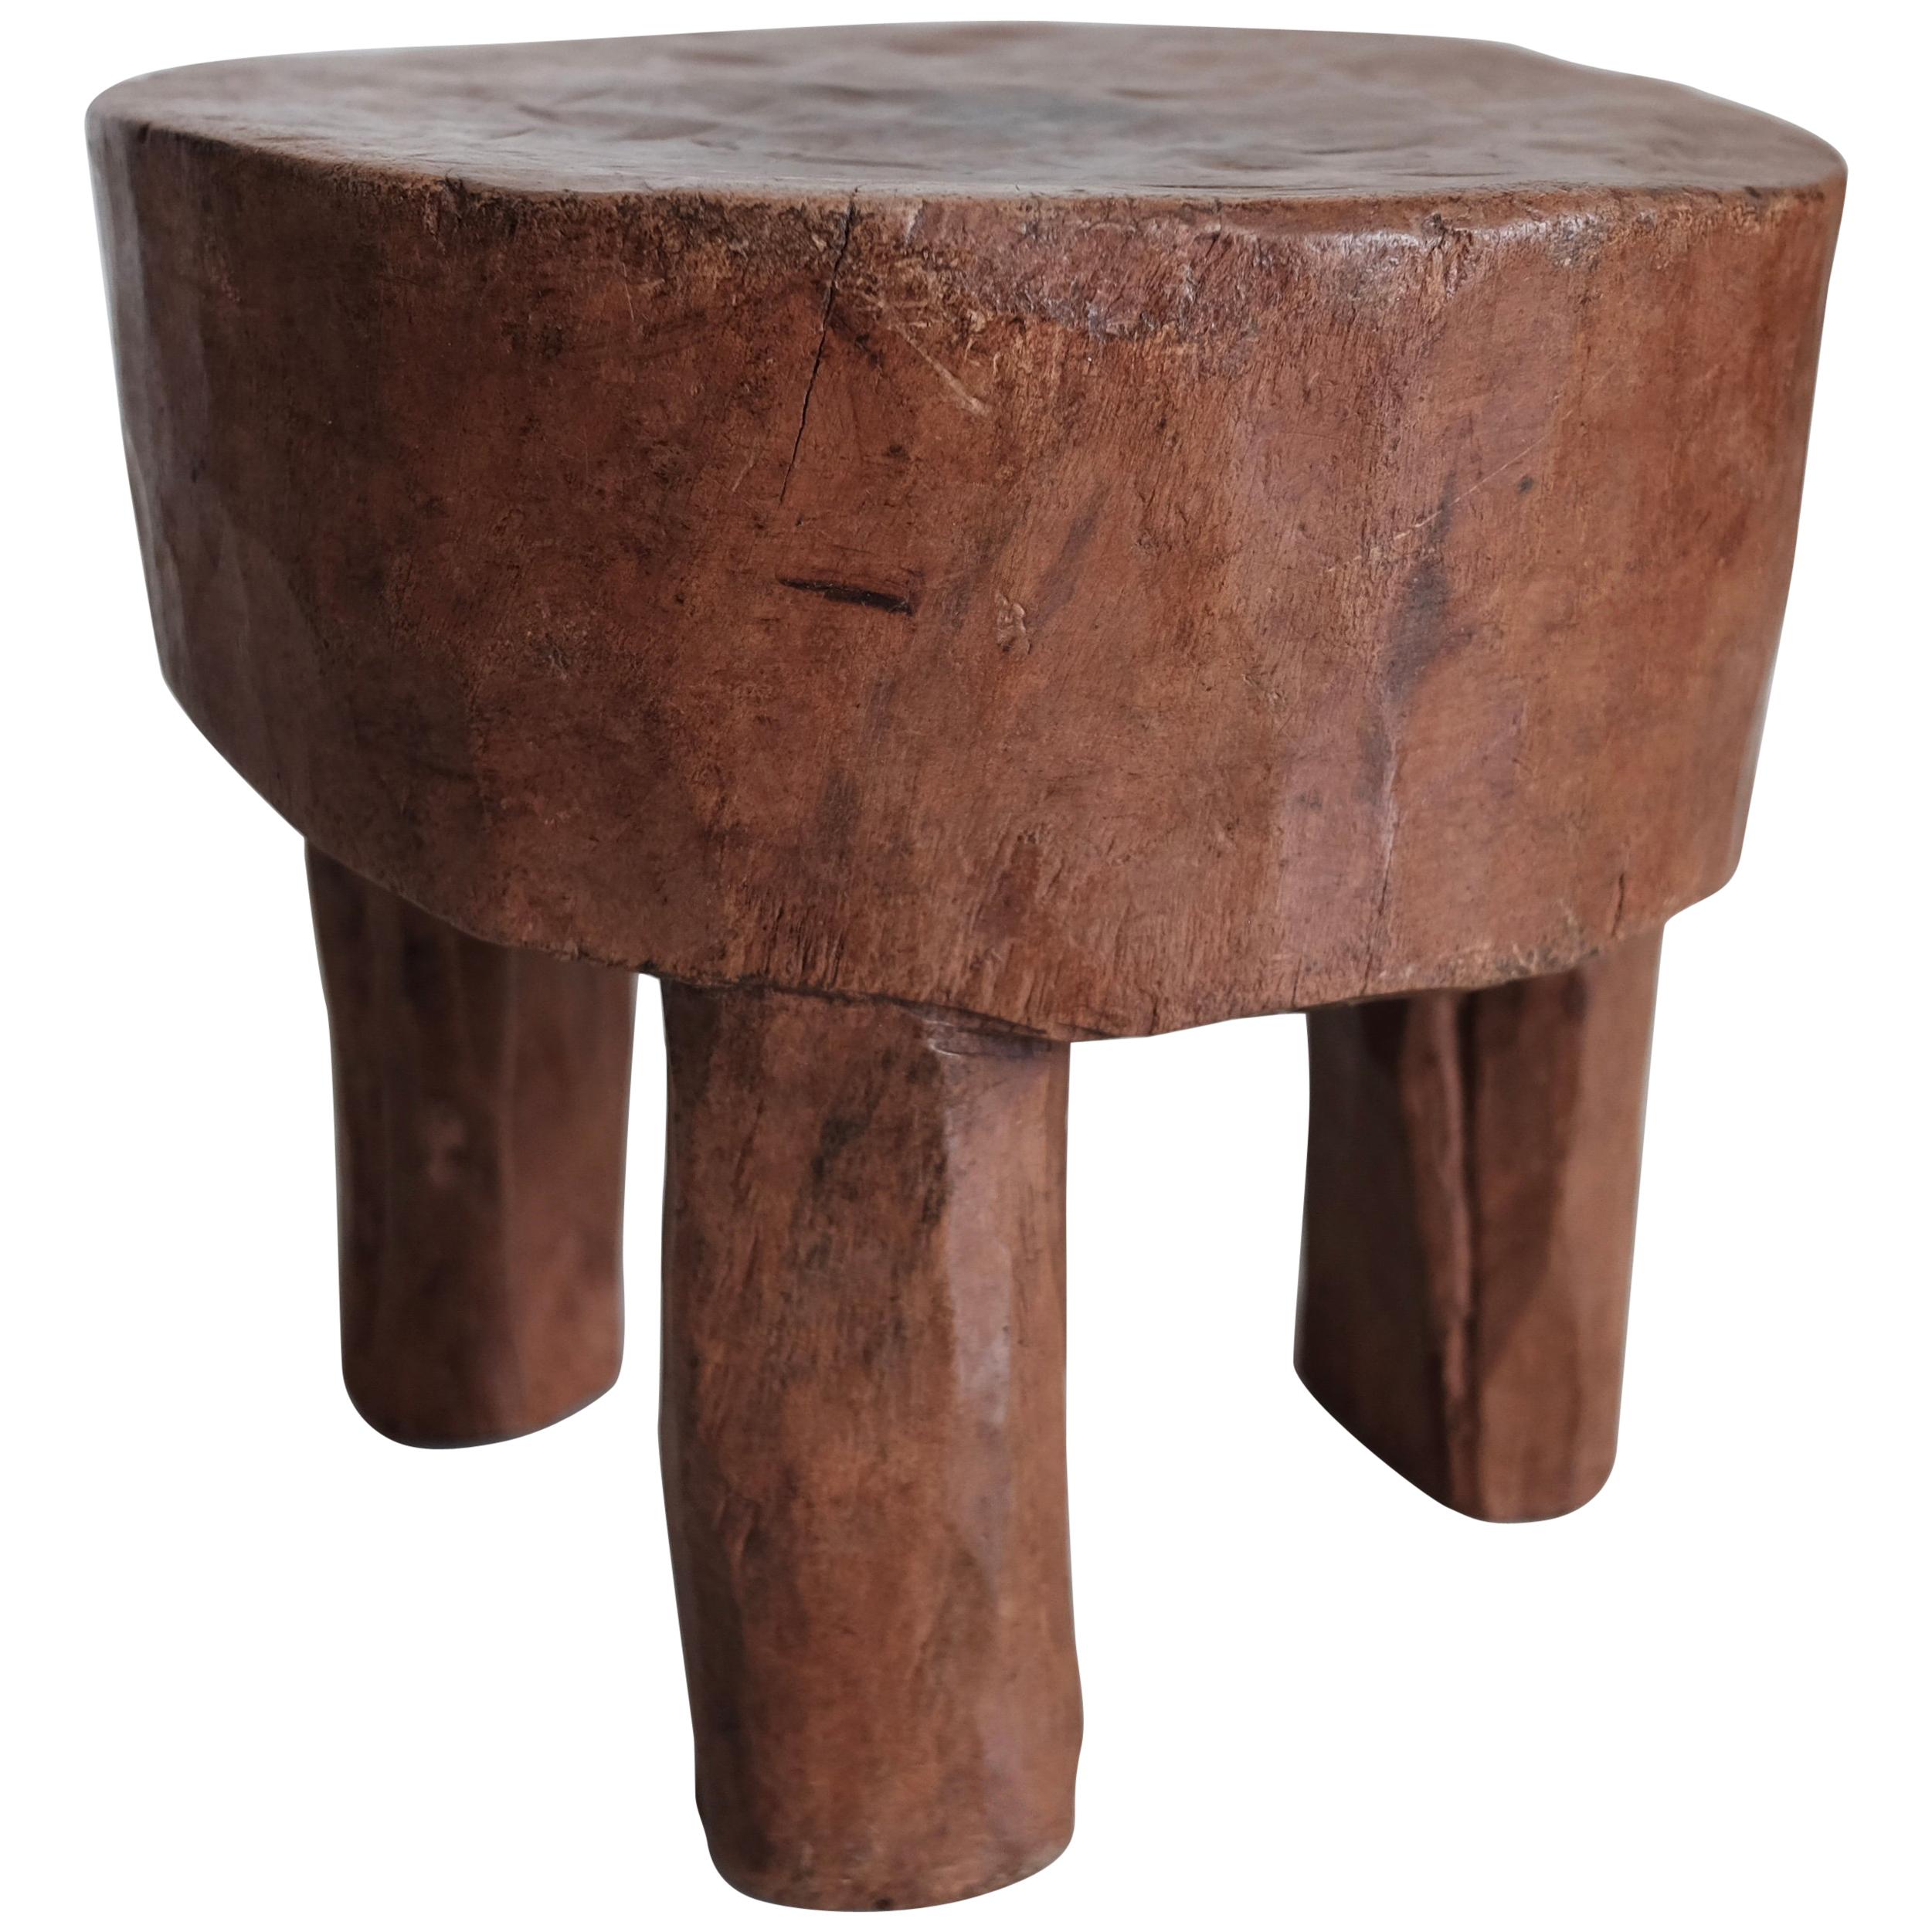 Primitive Low Stool from the Senufo tribe of Ivory Coast